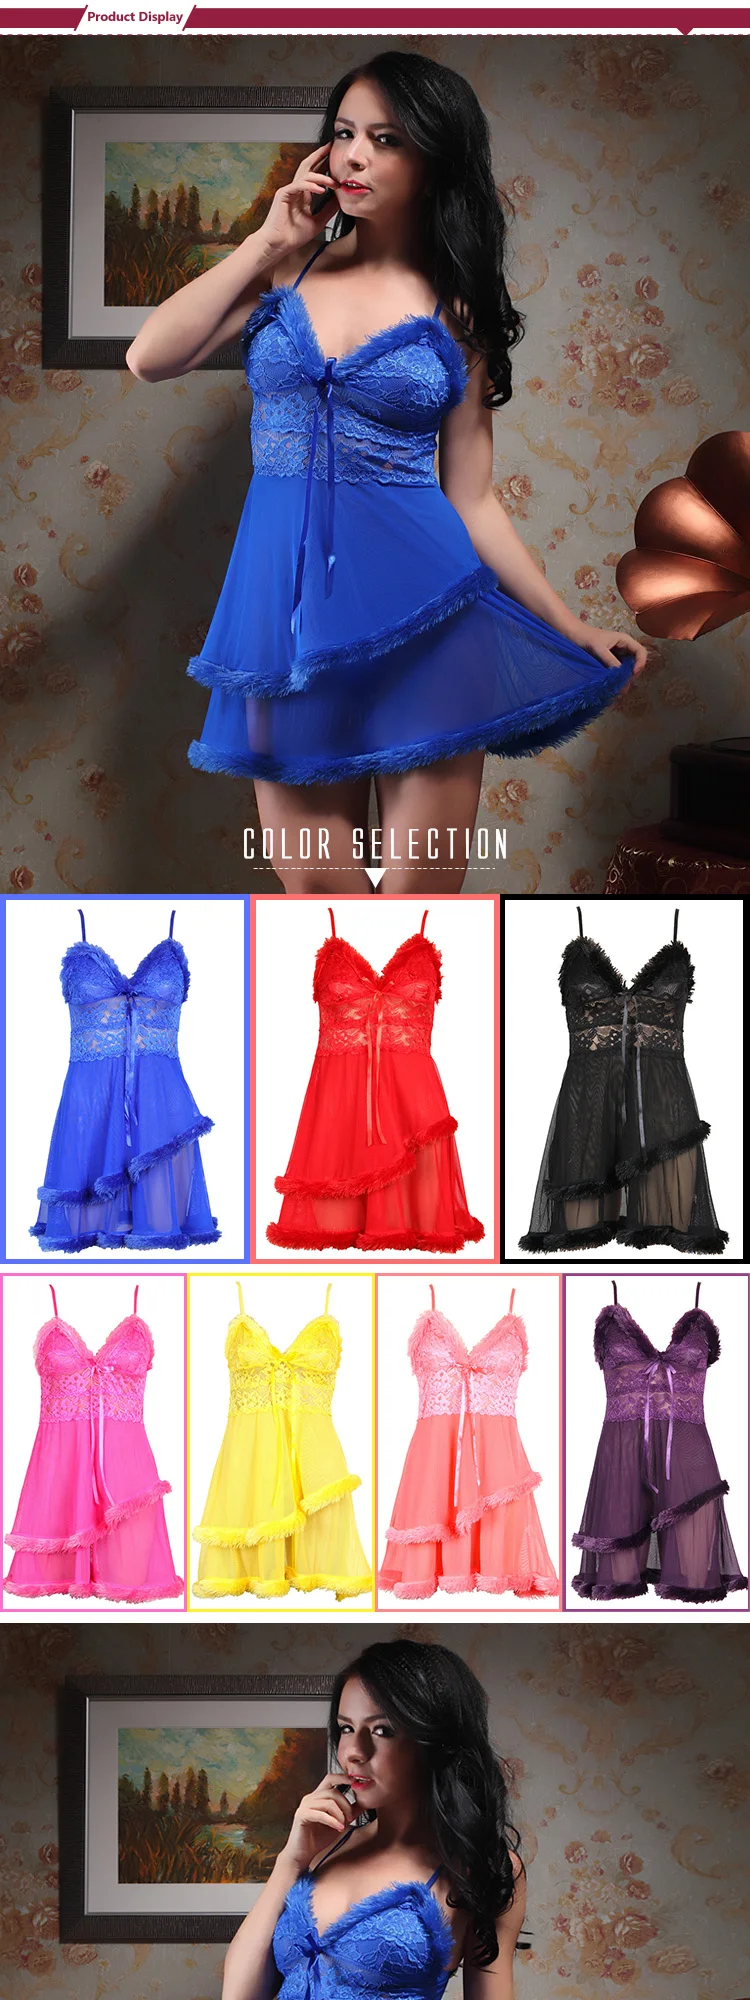 Hsz 502 Hot Sexy Lingerie Lace Mature Women Sexy Lingerie New Fashion